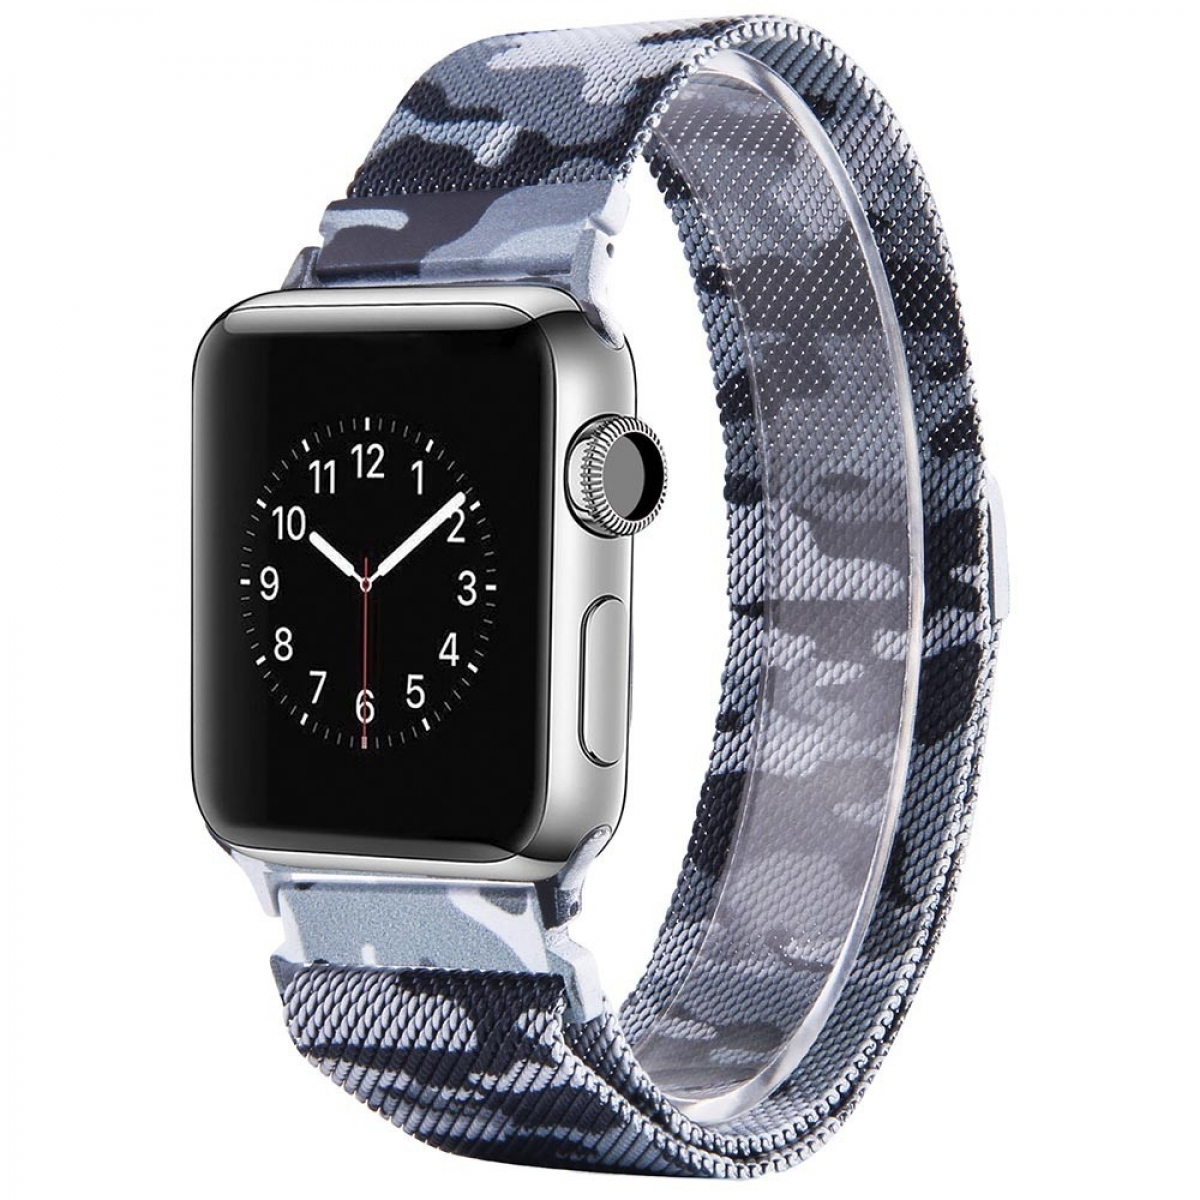 Camouflage, Milanaise CASEONLINE Watch Apple, Multicolor 42mm, Smartband,